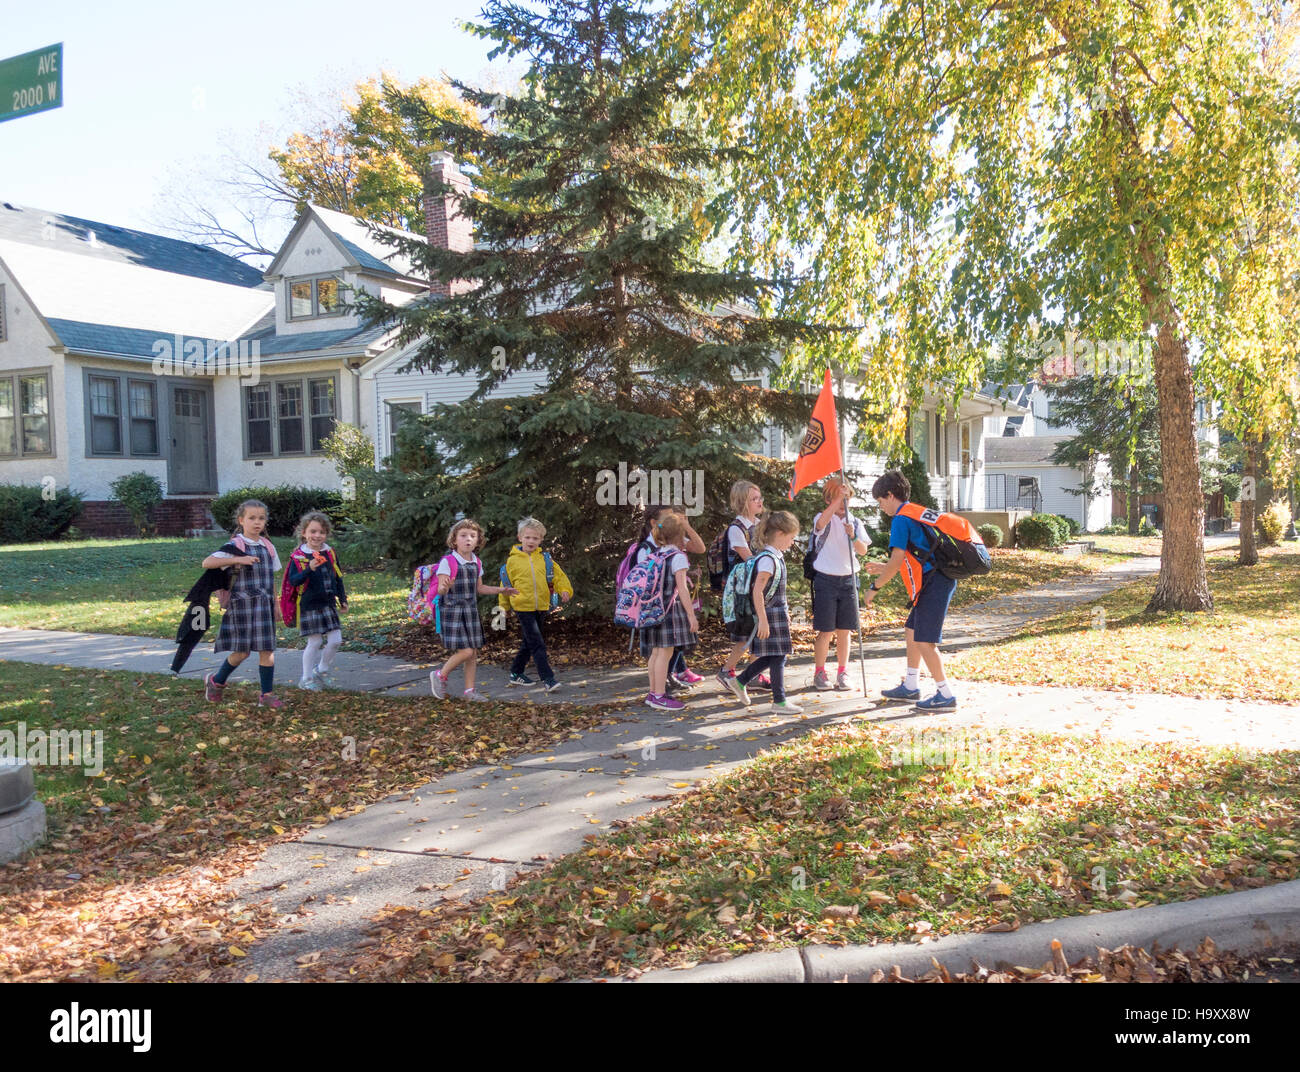 Young children lining up behind school patrol to guide them across street. St Paul Minnesota MN USA Stock Photo